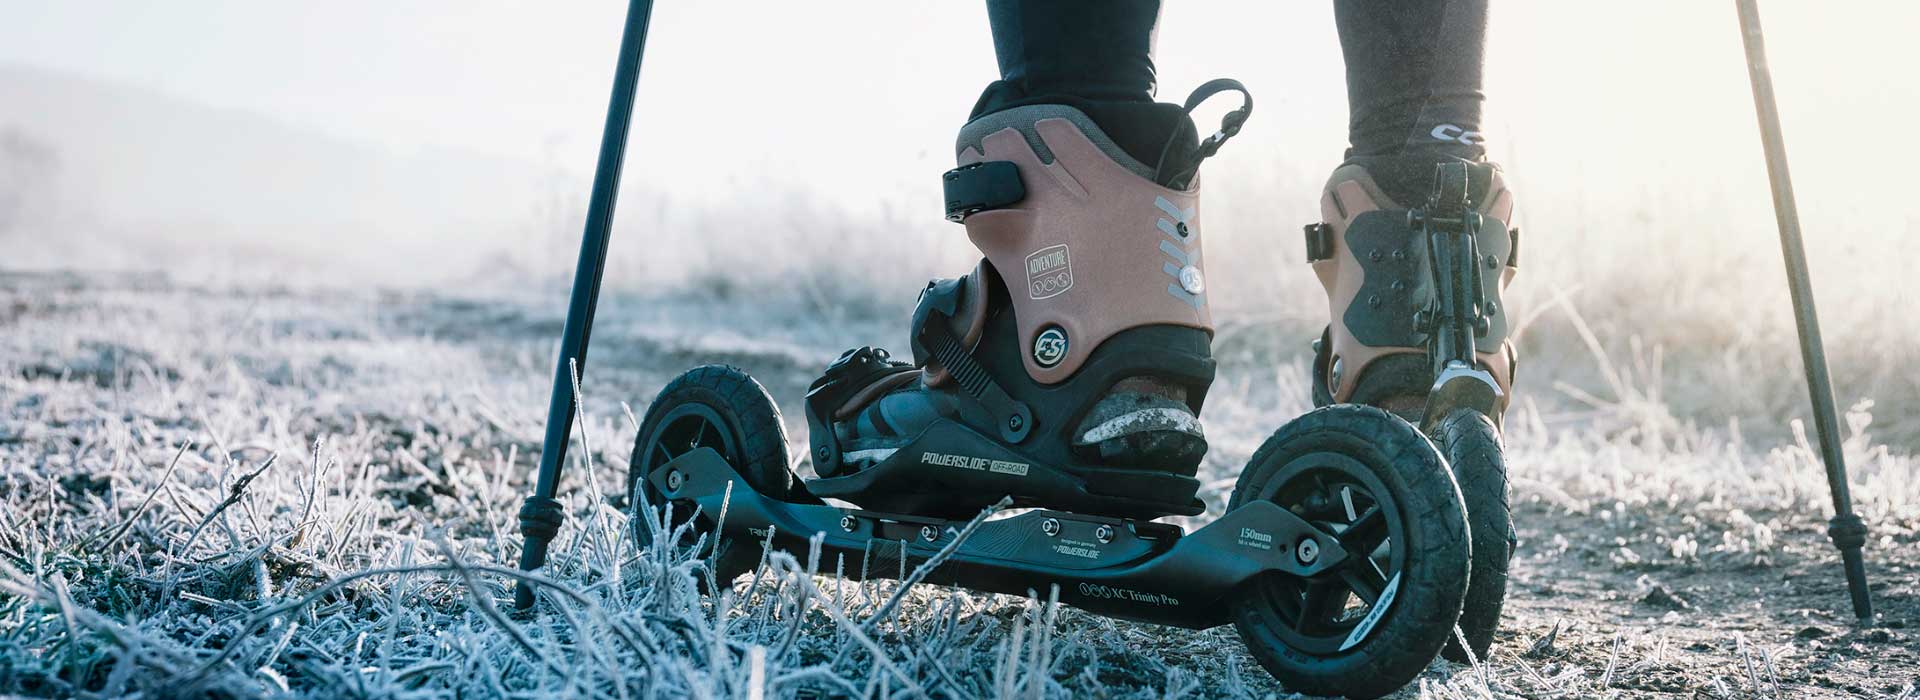 A close-up of a person wearing Powerslide adventure inline skates